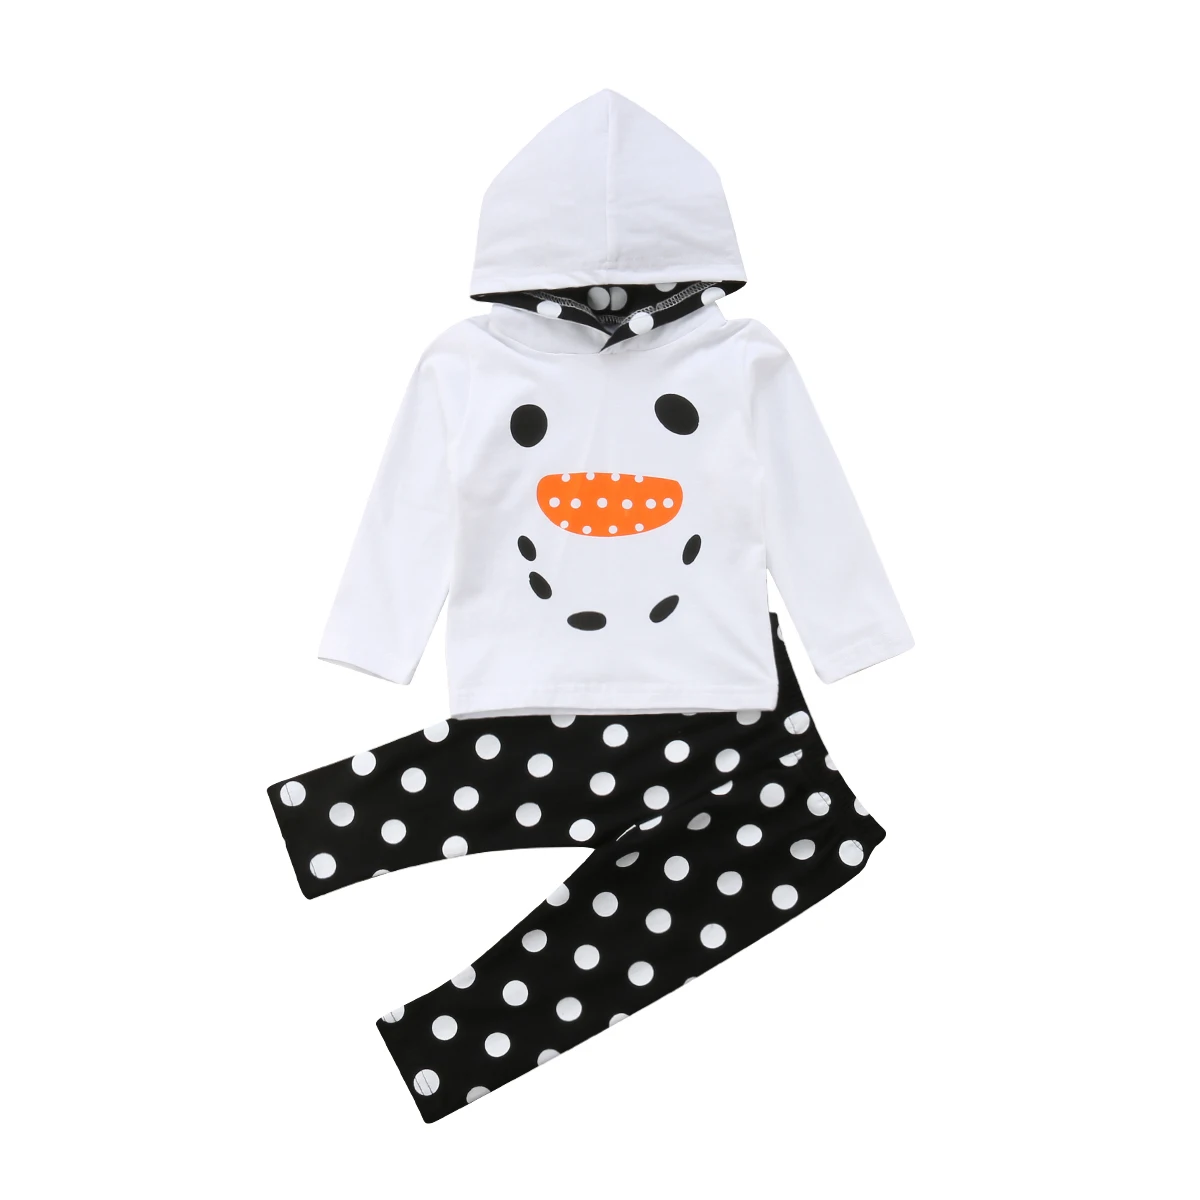 

Christmas Pretty Causal Infant Baby Girls Clothes 2PCS Cartoon Print Long Sleeve Hooded Pullover Tops+Dot Pants 6M-5Y